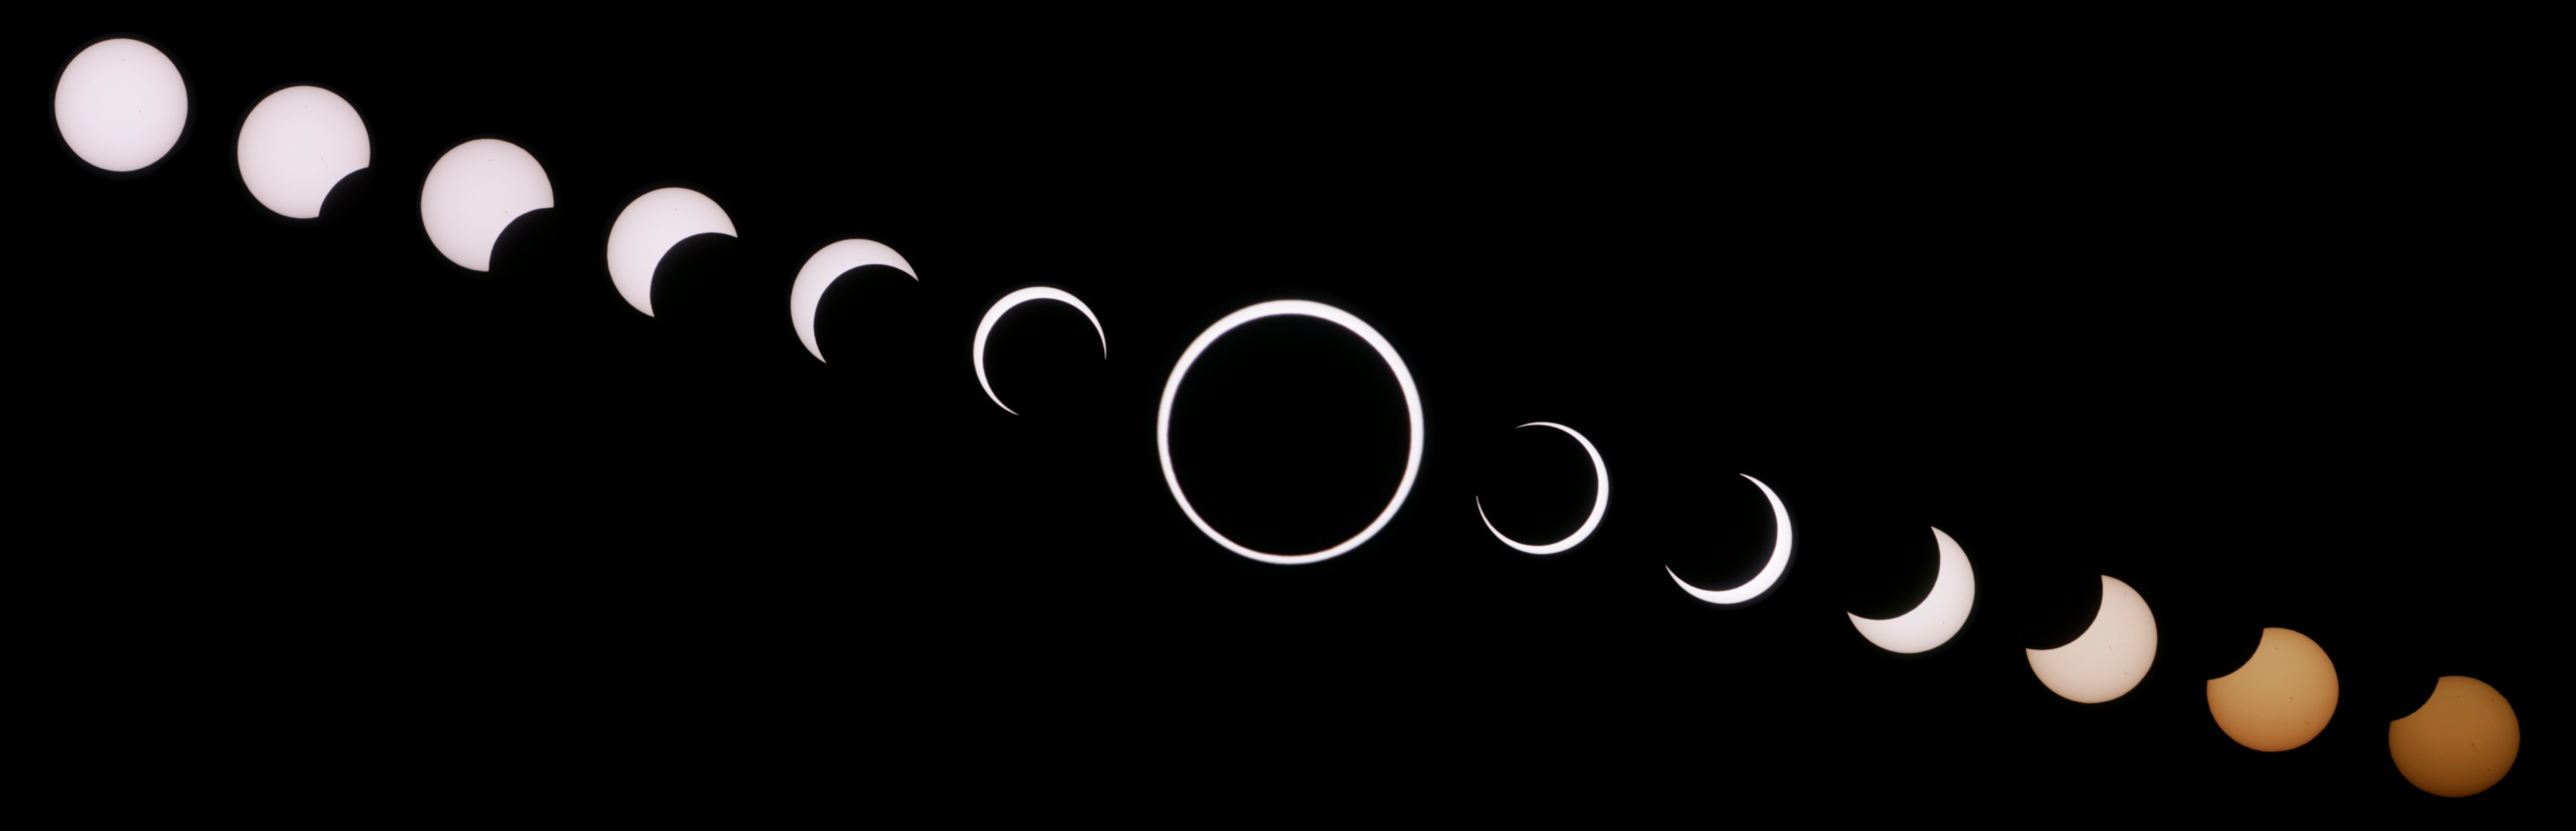 An illustration of the phases of the eclipse against a black background